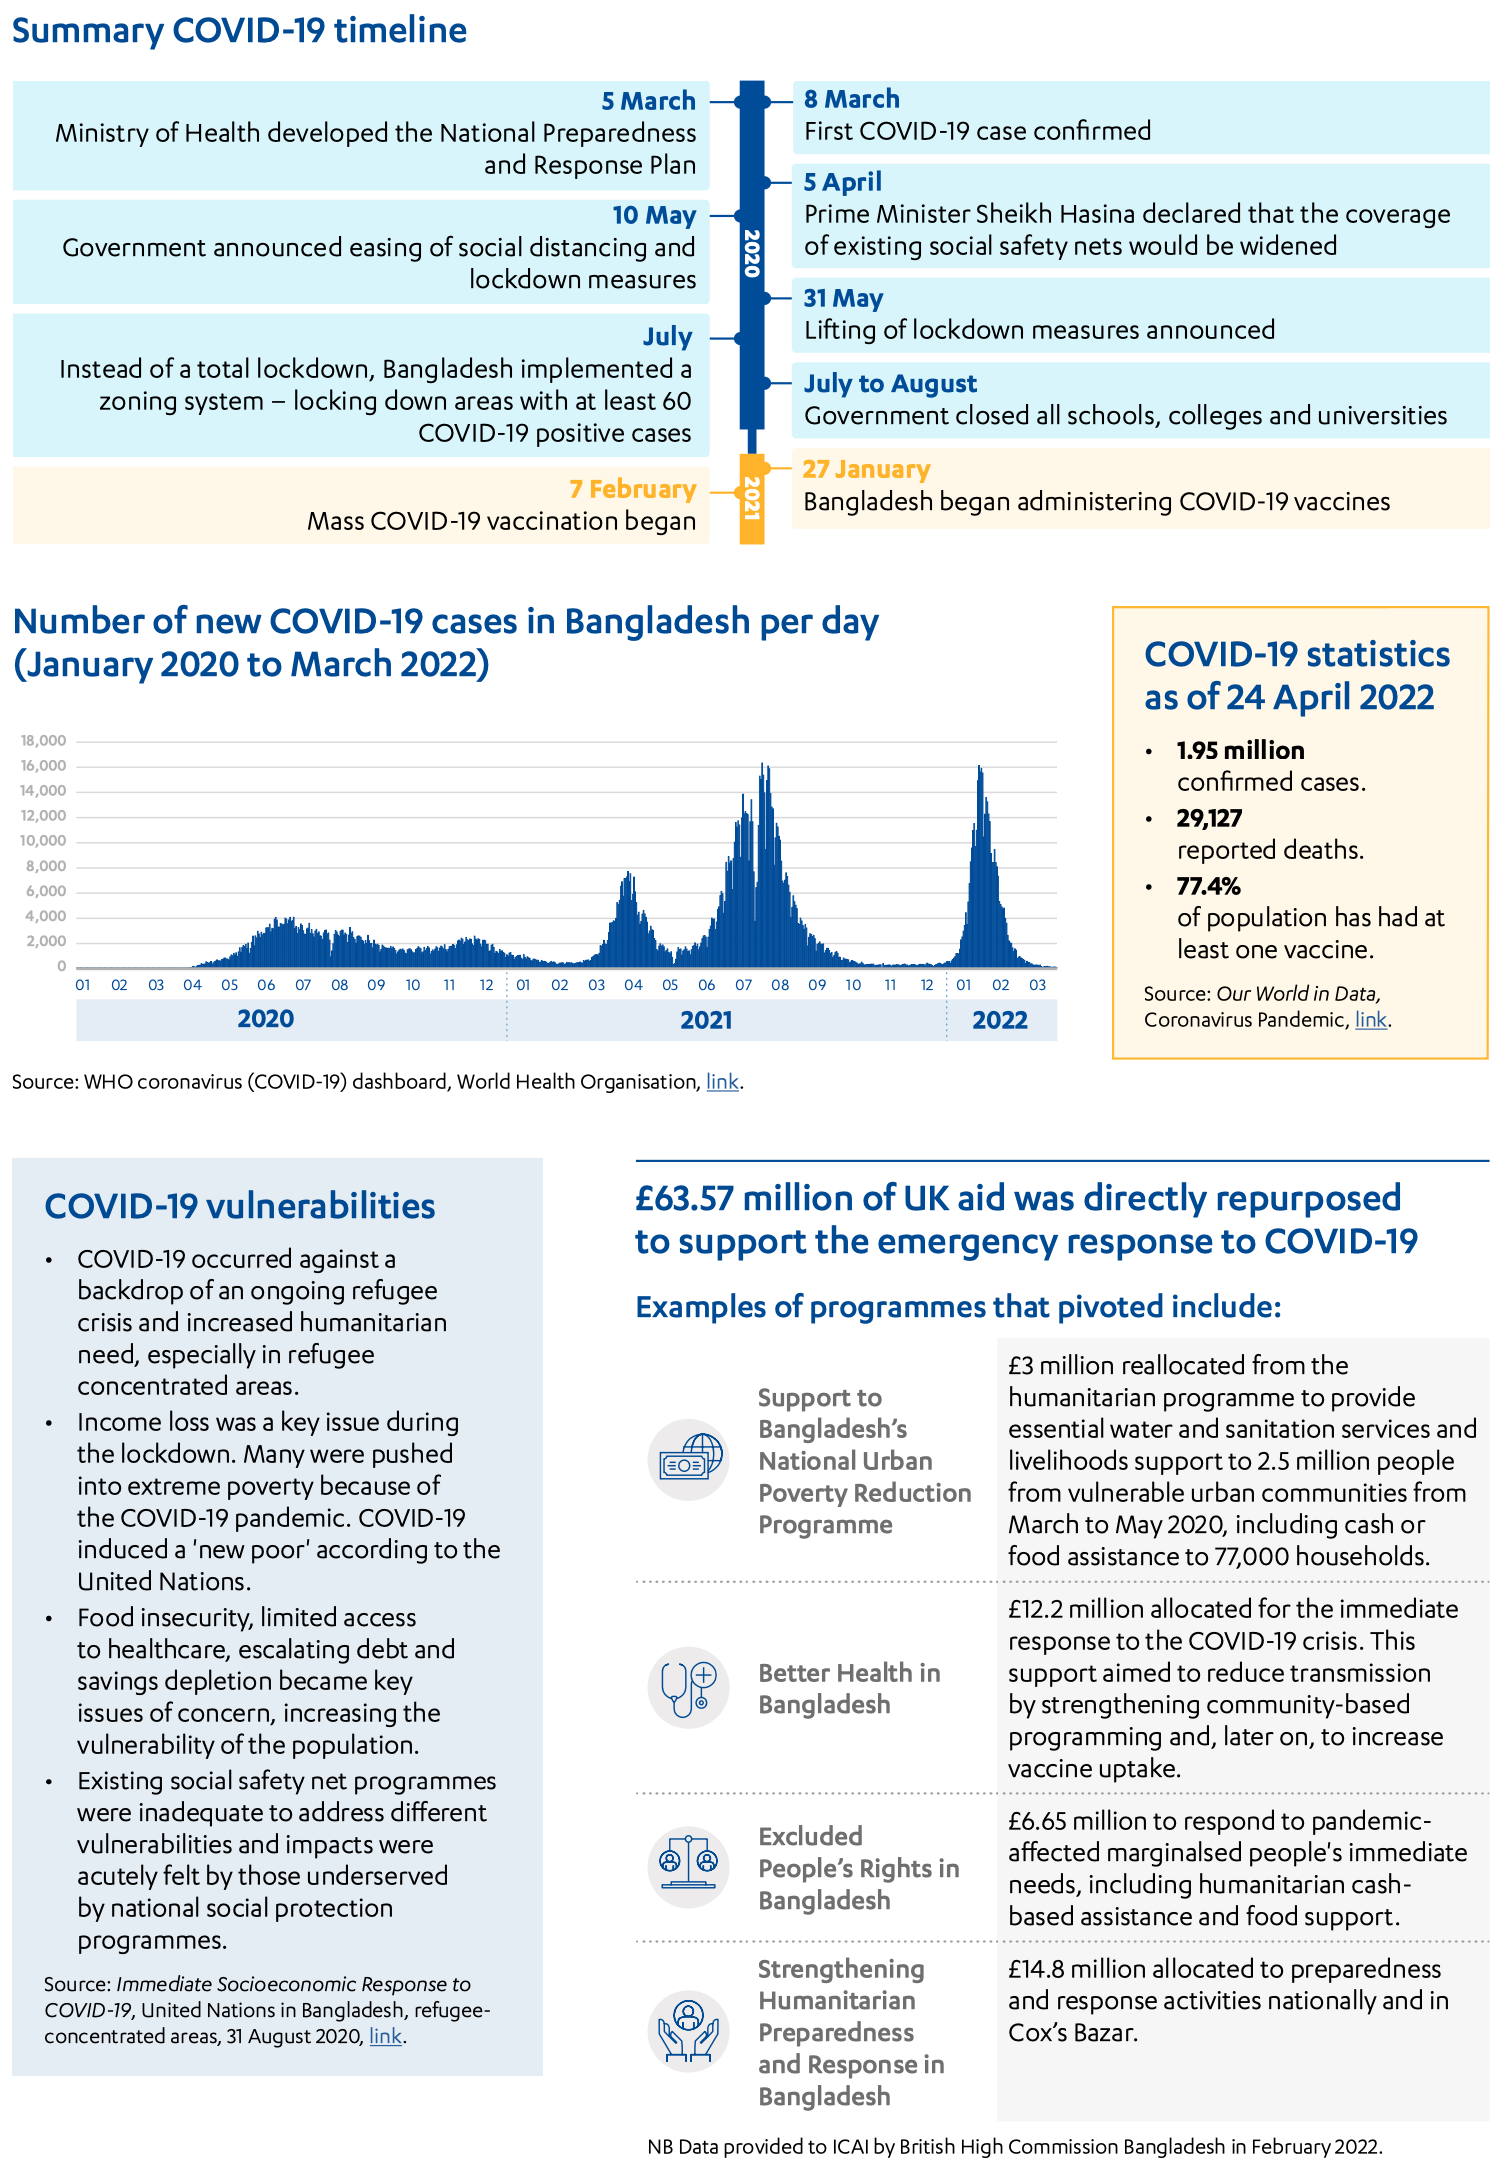 Bangladesh case study, including Summary COVID-19 timeline, COVID-19 statistics, COVID-19 vulnerabilities and examples of UK aid repurposed to support the humanitarian response to COVID-19